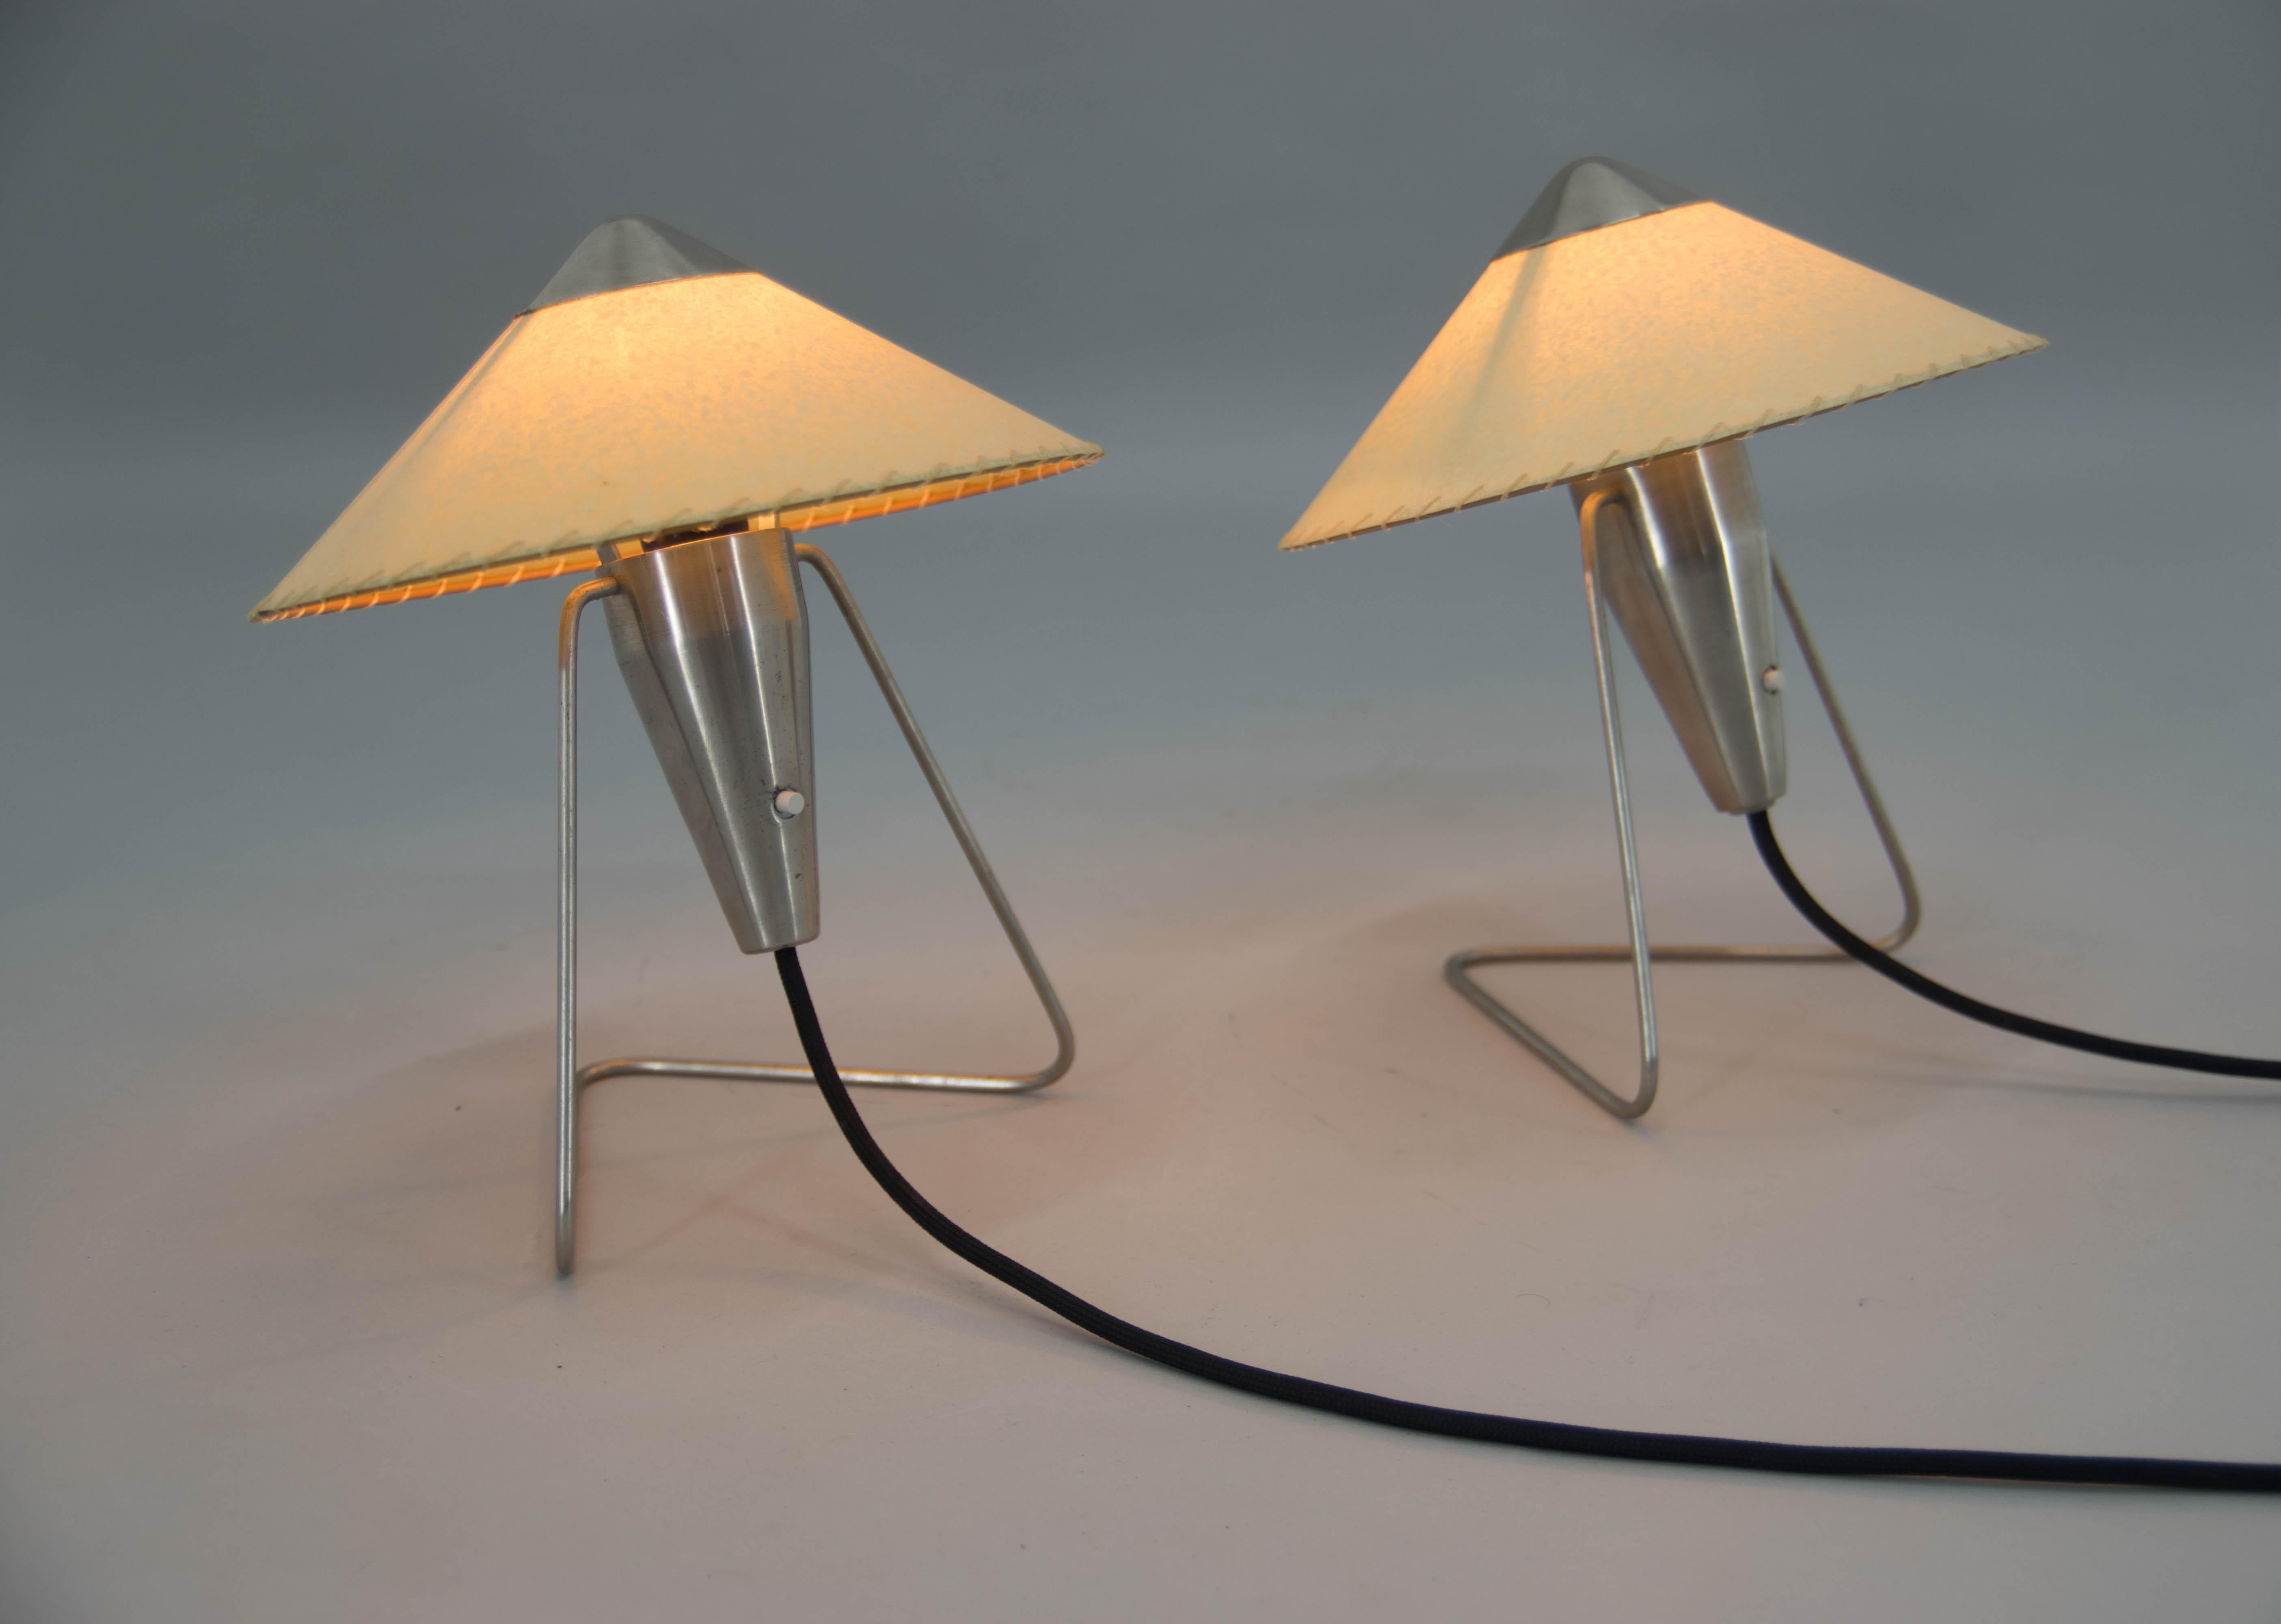 Pair of table or wall lamps designed by Helena Frantova for OKOLO, Czechoslovakia. Cleaned and polished. New parchment paper shades. Rewired: 1x40W, E12-E14 bulb.
US plug adapters included.